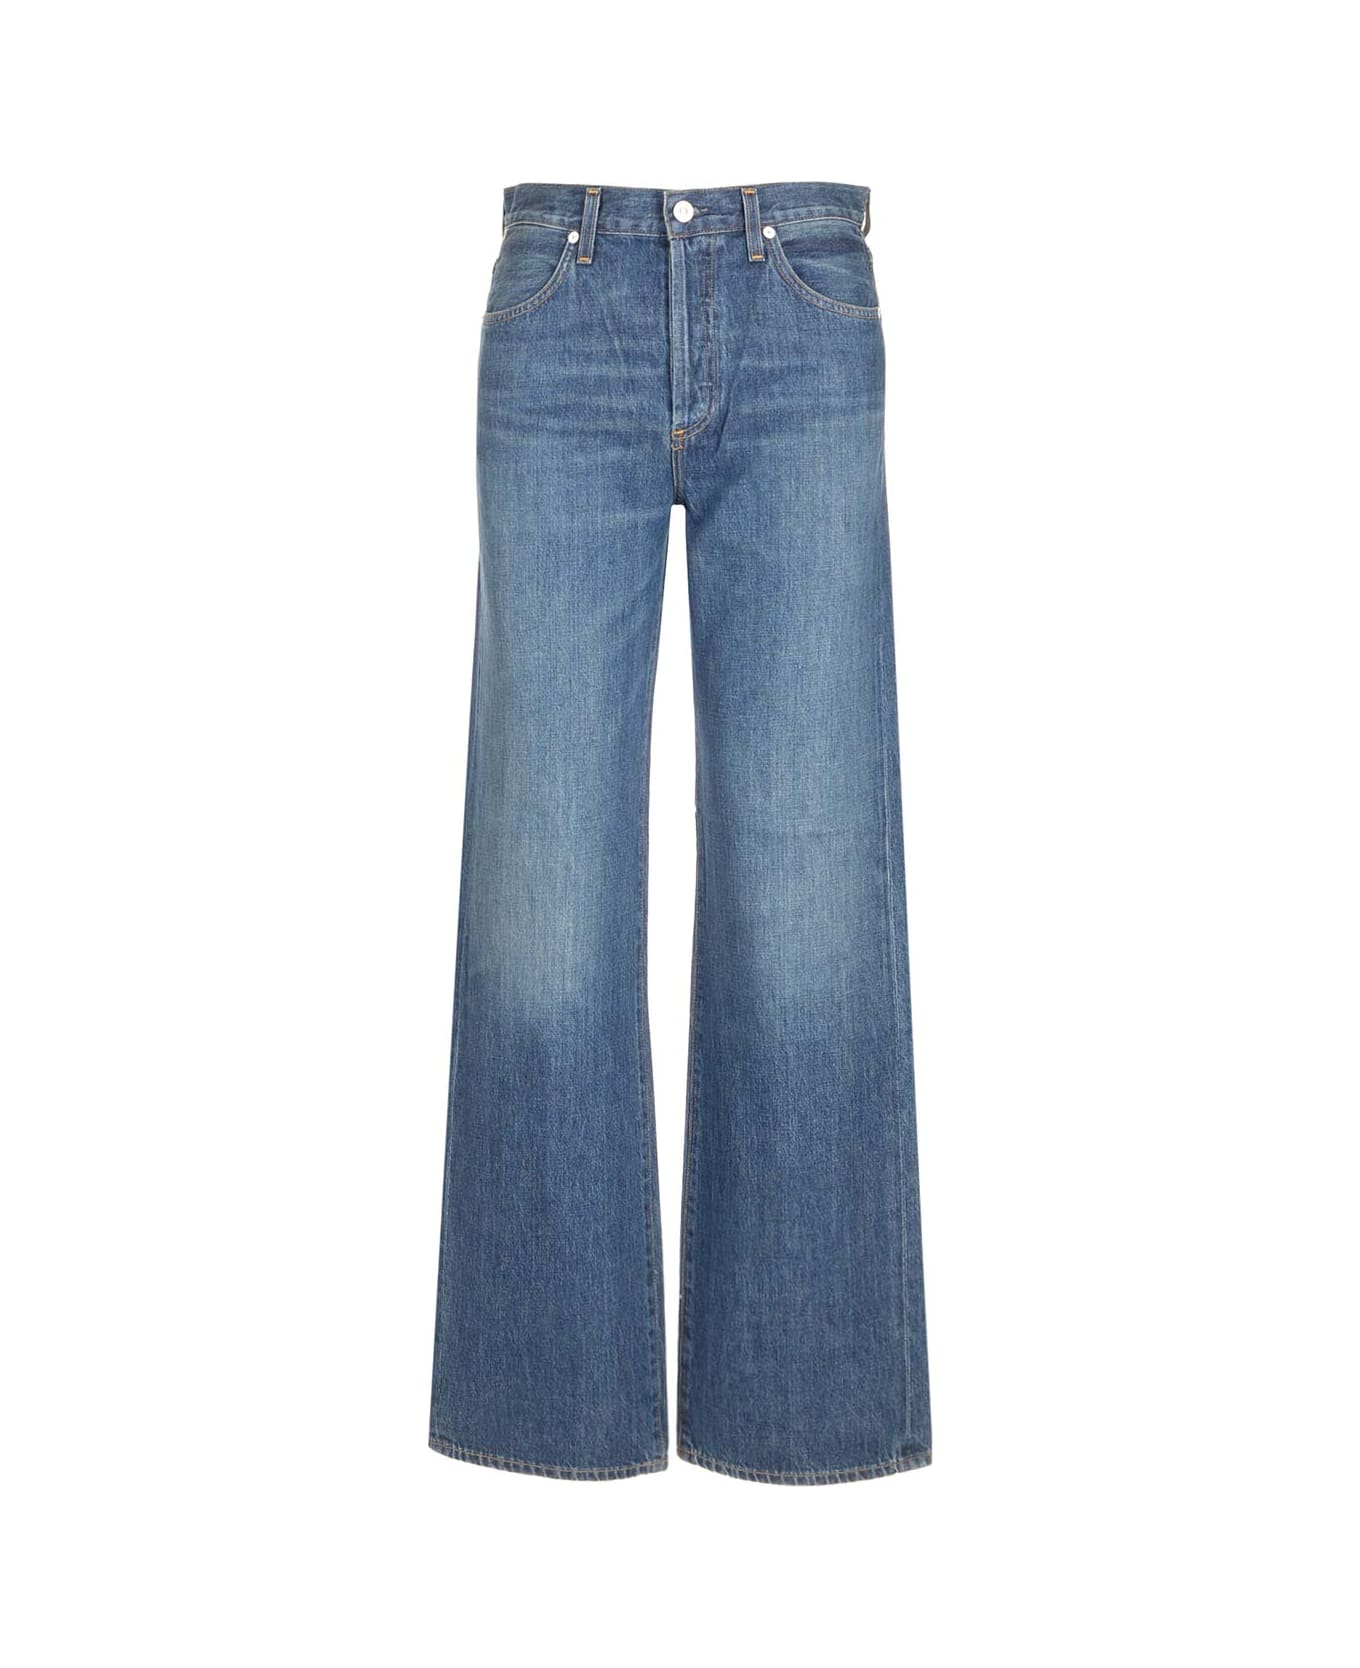 Citizens of Humanity "annina" Wide Leg Jeans - Blue